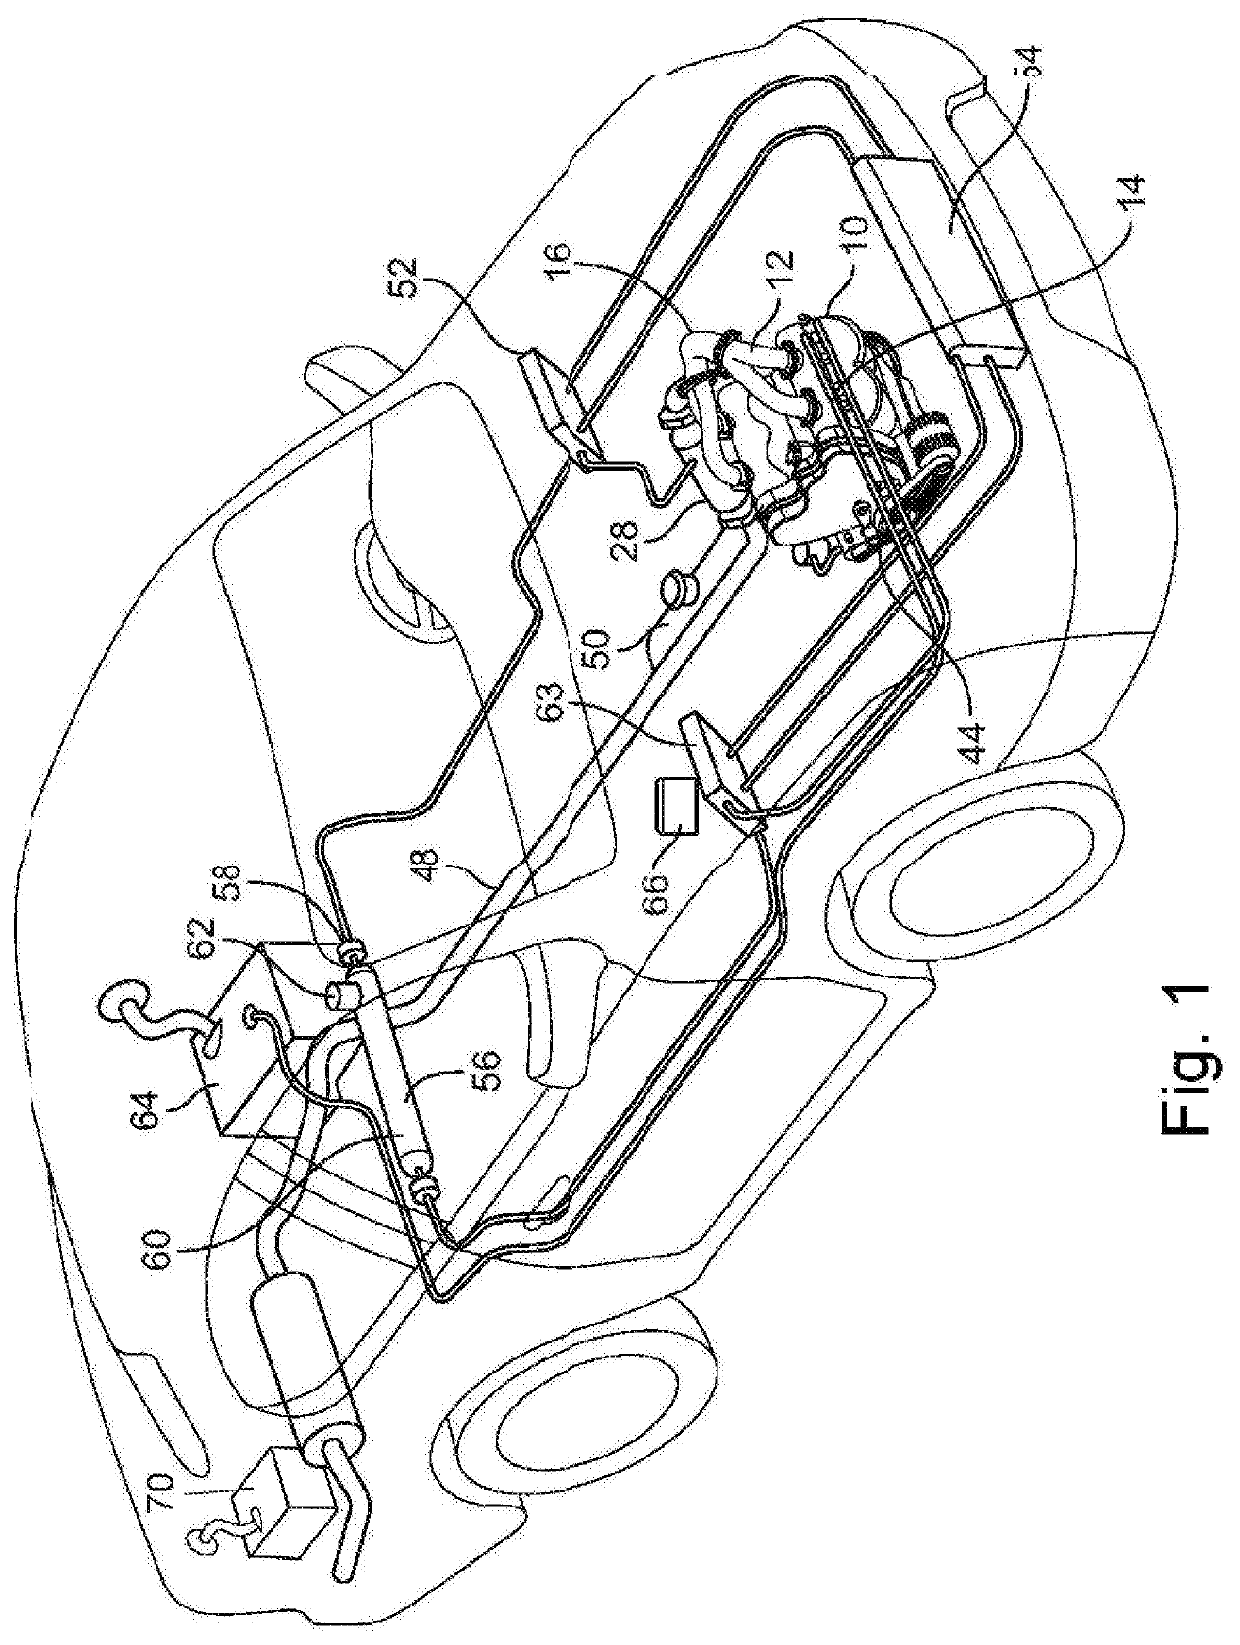 Power system with internal combustion engine